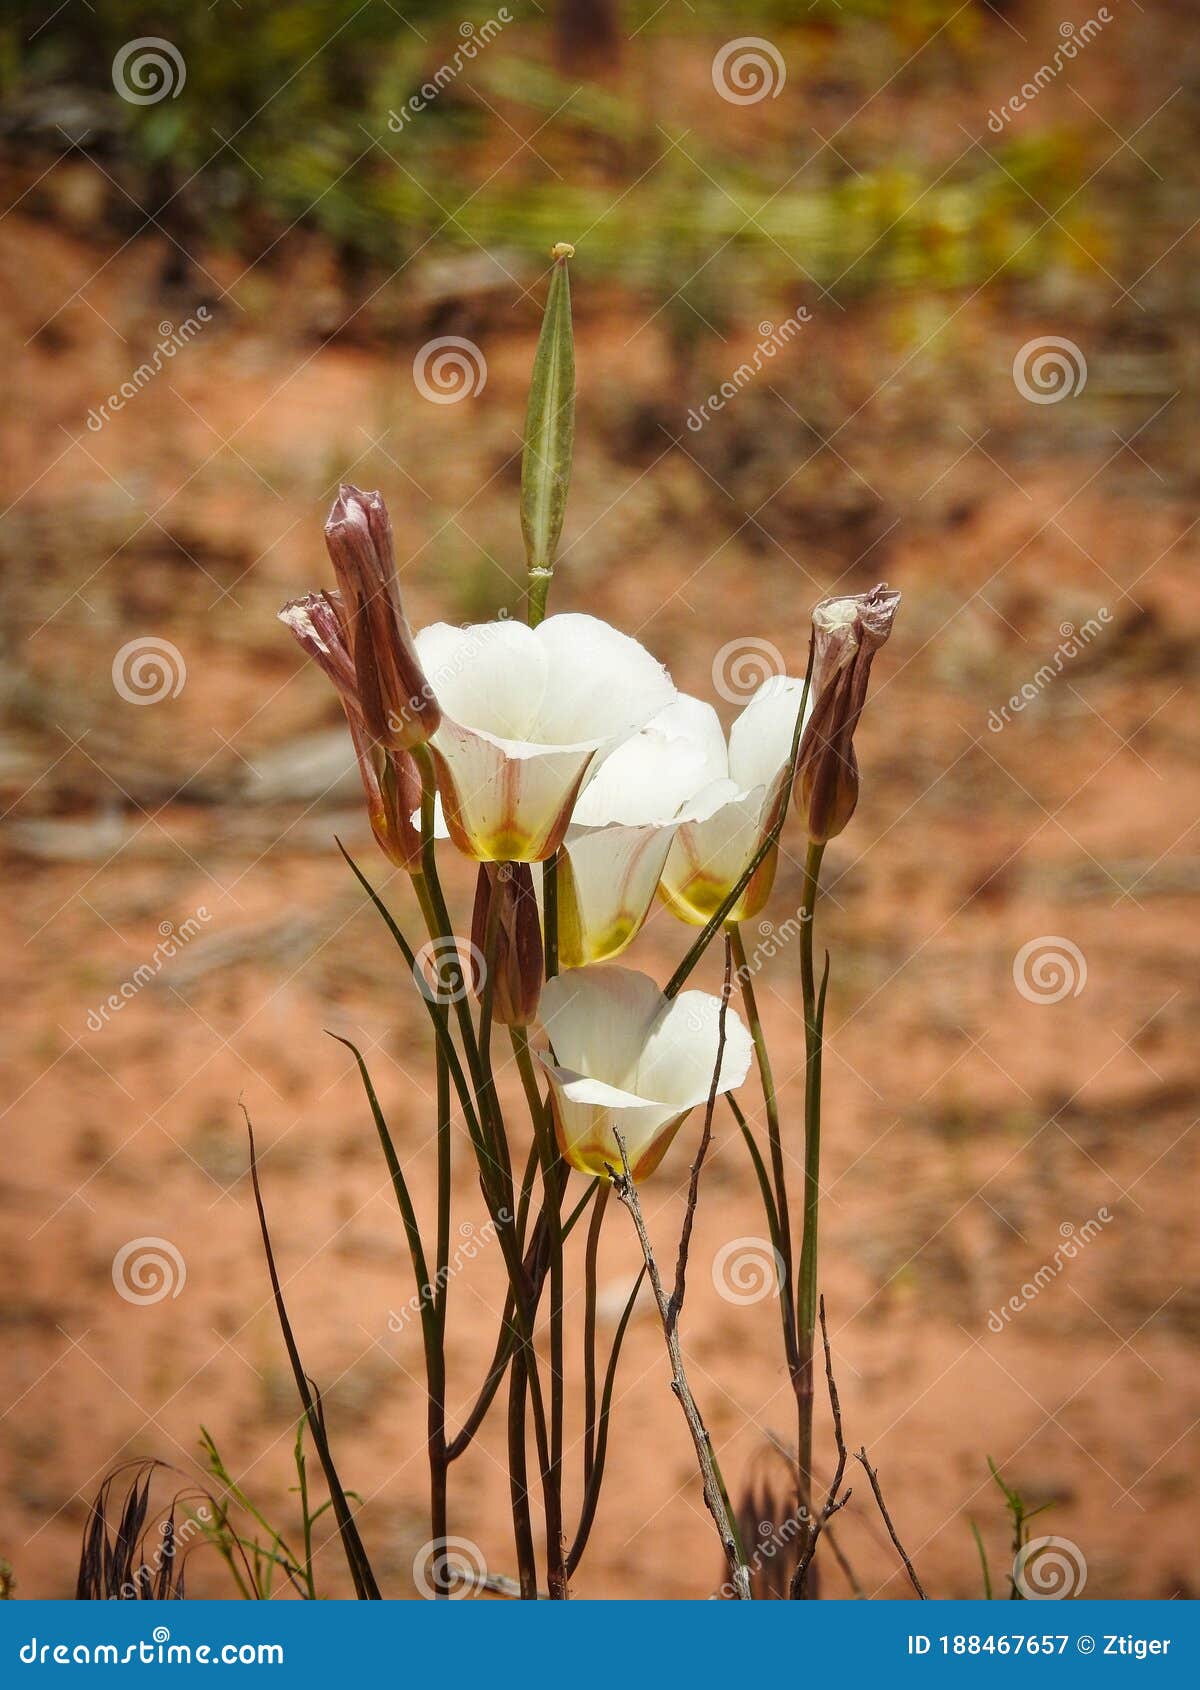 18 Sego Lily Photos Free Royalty Free Stock Photos From Dreamstime